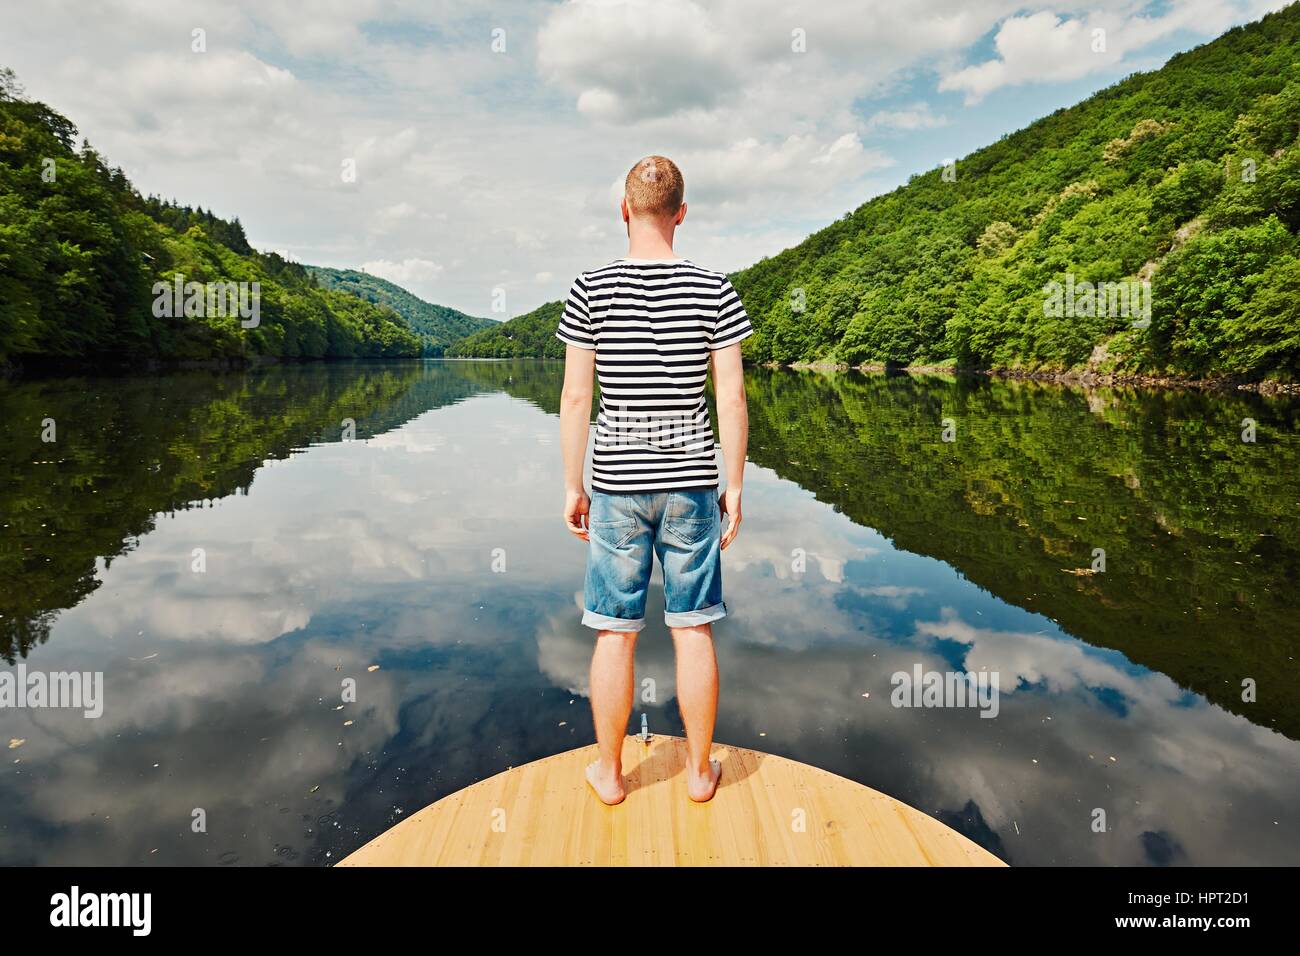 Vacation trip on the river. Handsome man with blue and white striped shirt on the prow of the boat. Vltava river near Prague, Czech Republic Stock Photo